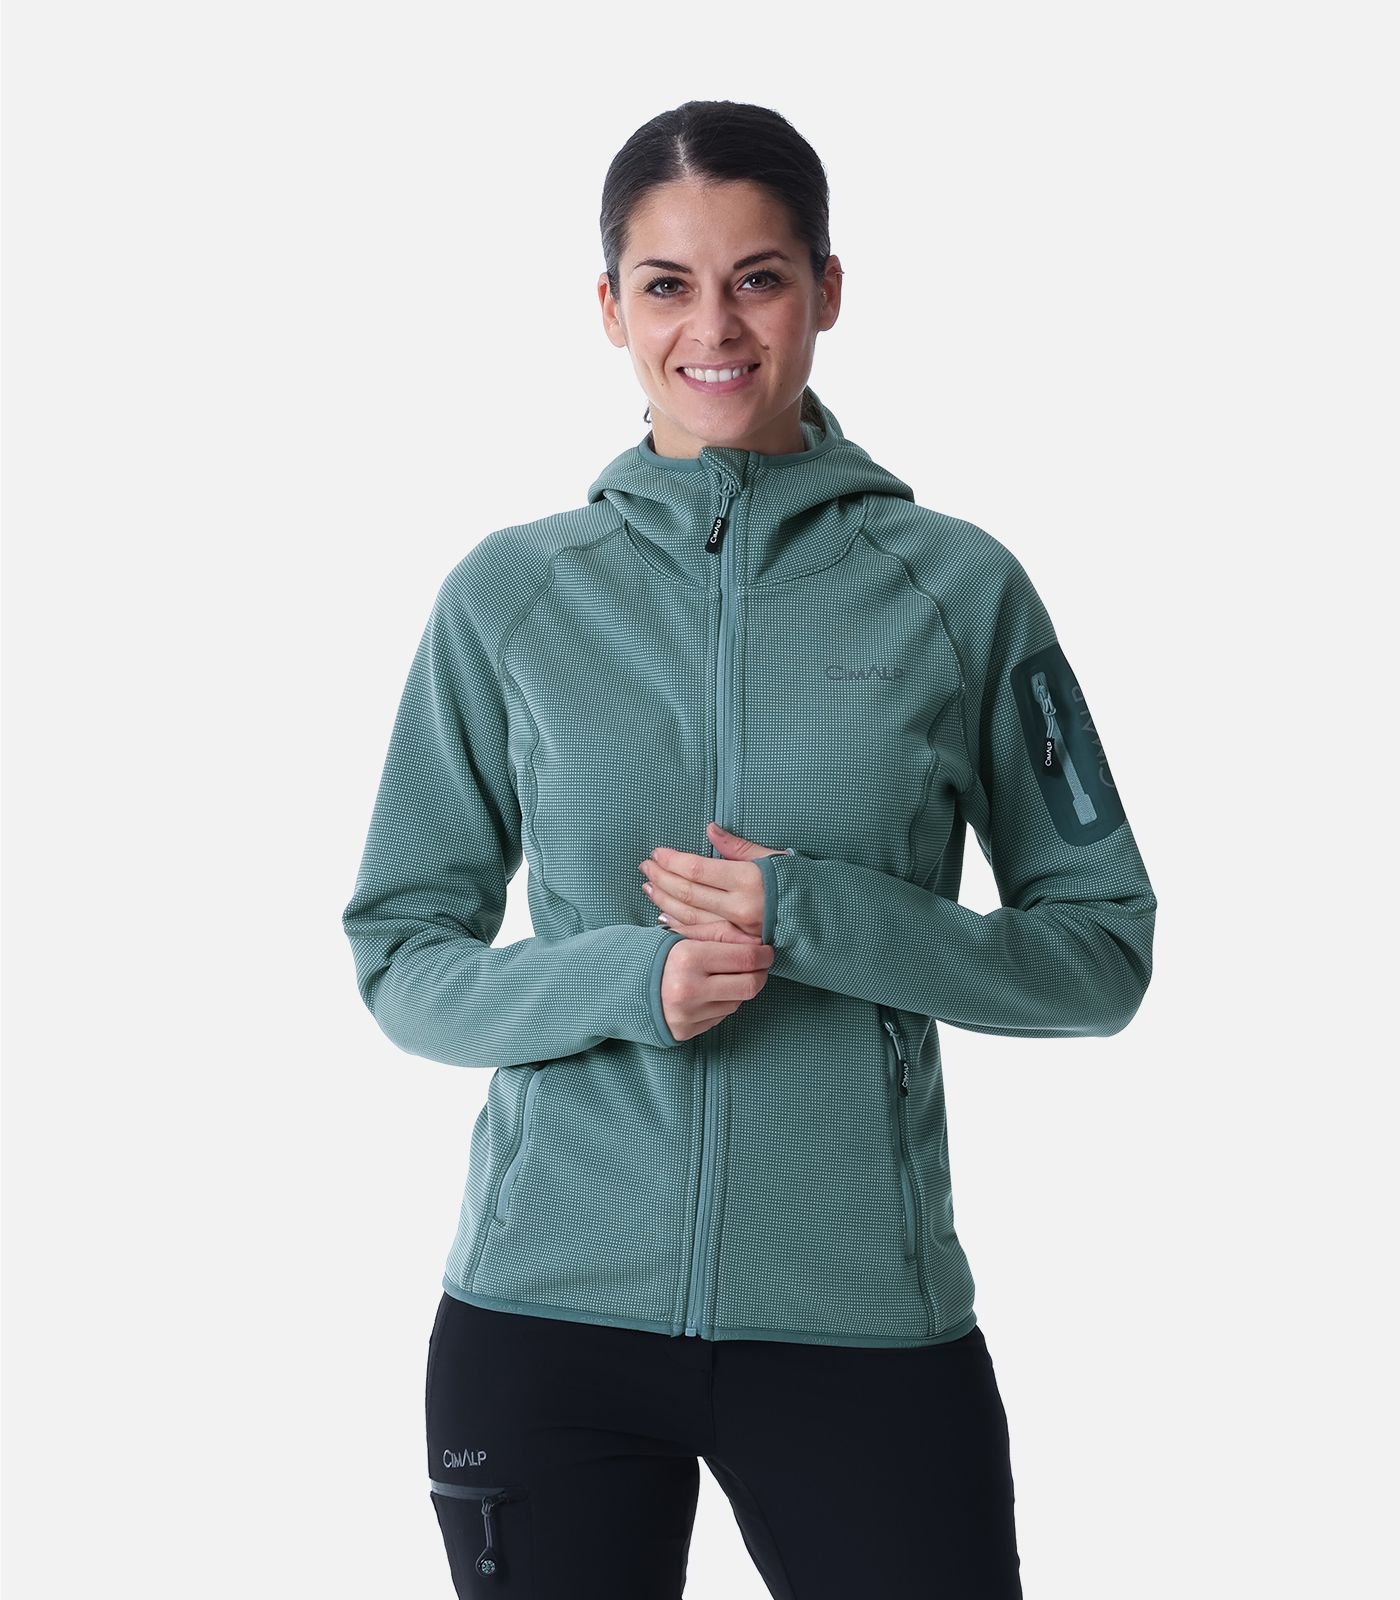 Strong and extra-warm fleece jacket